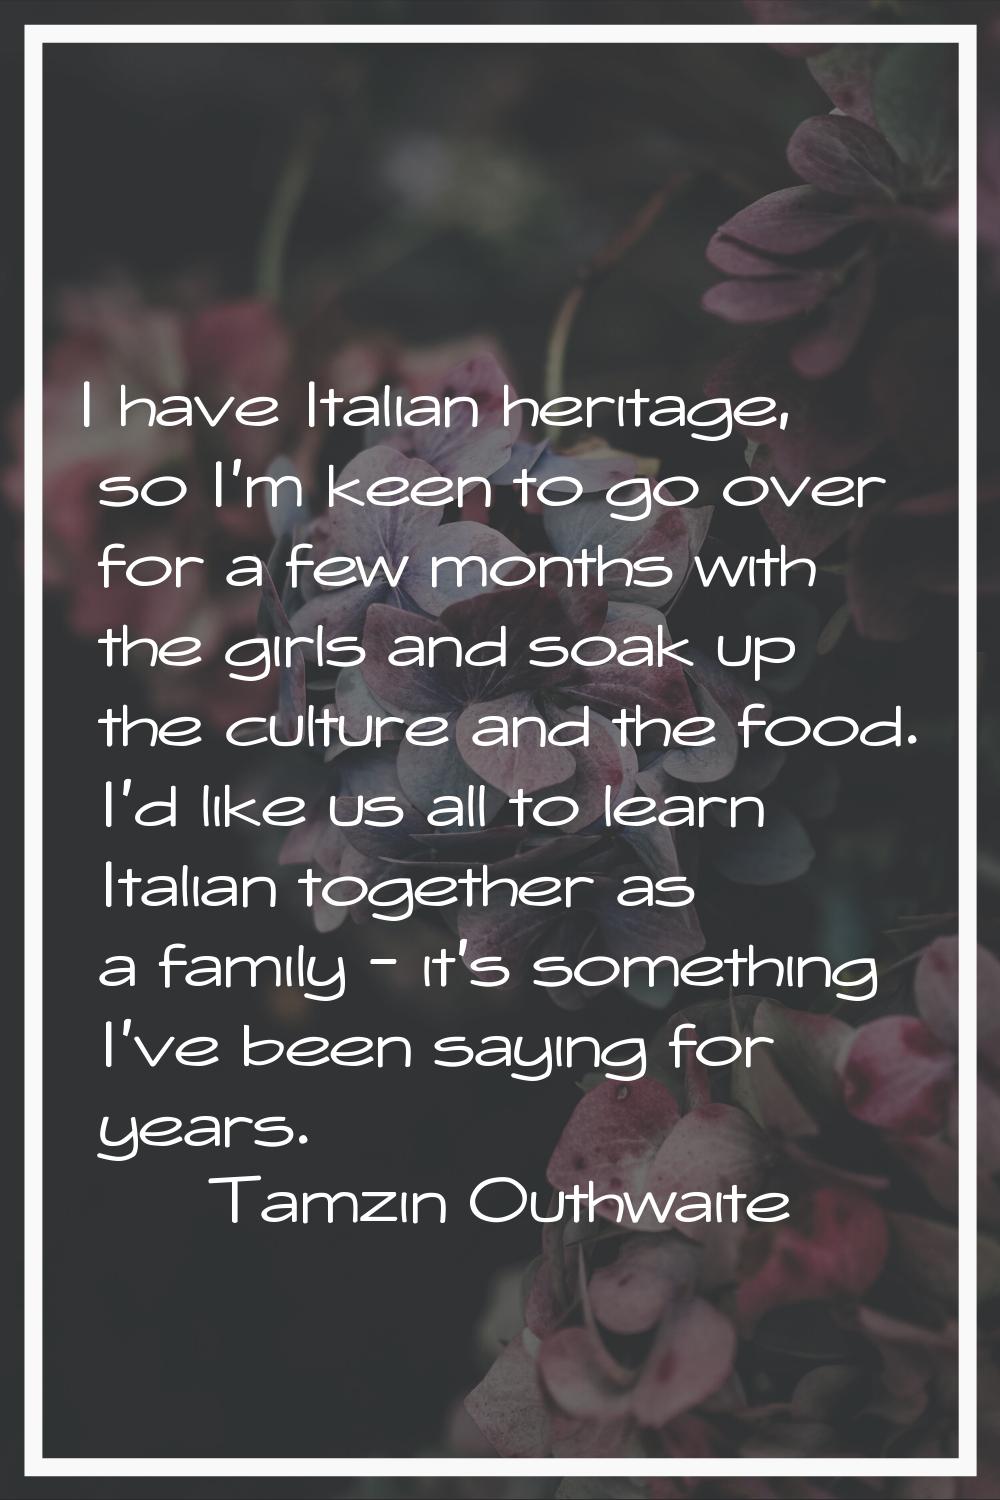 I have Italian heritage, so I'm keen to go over for a few months with the girls and soak up the cul